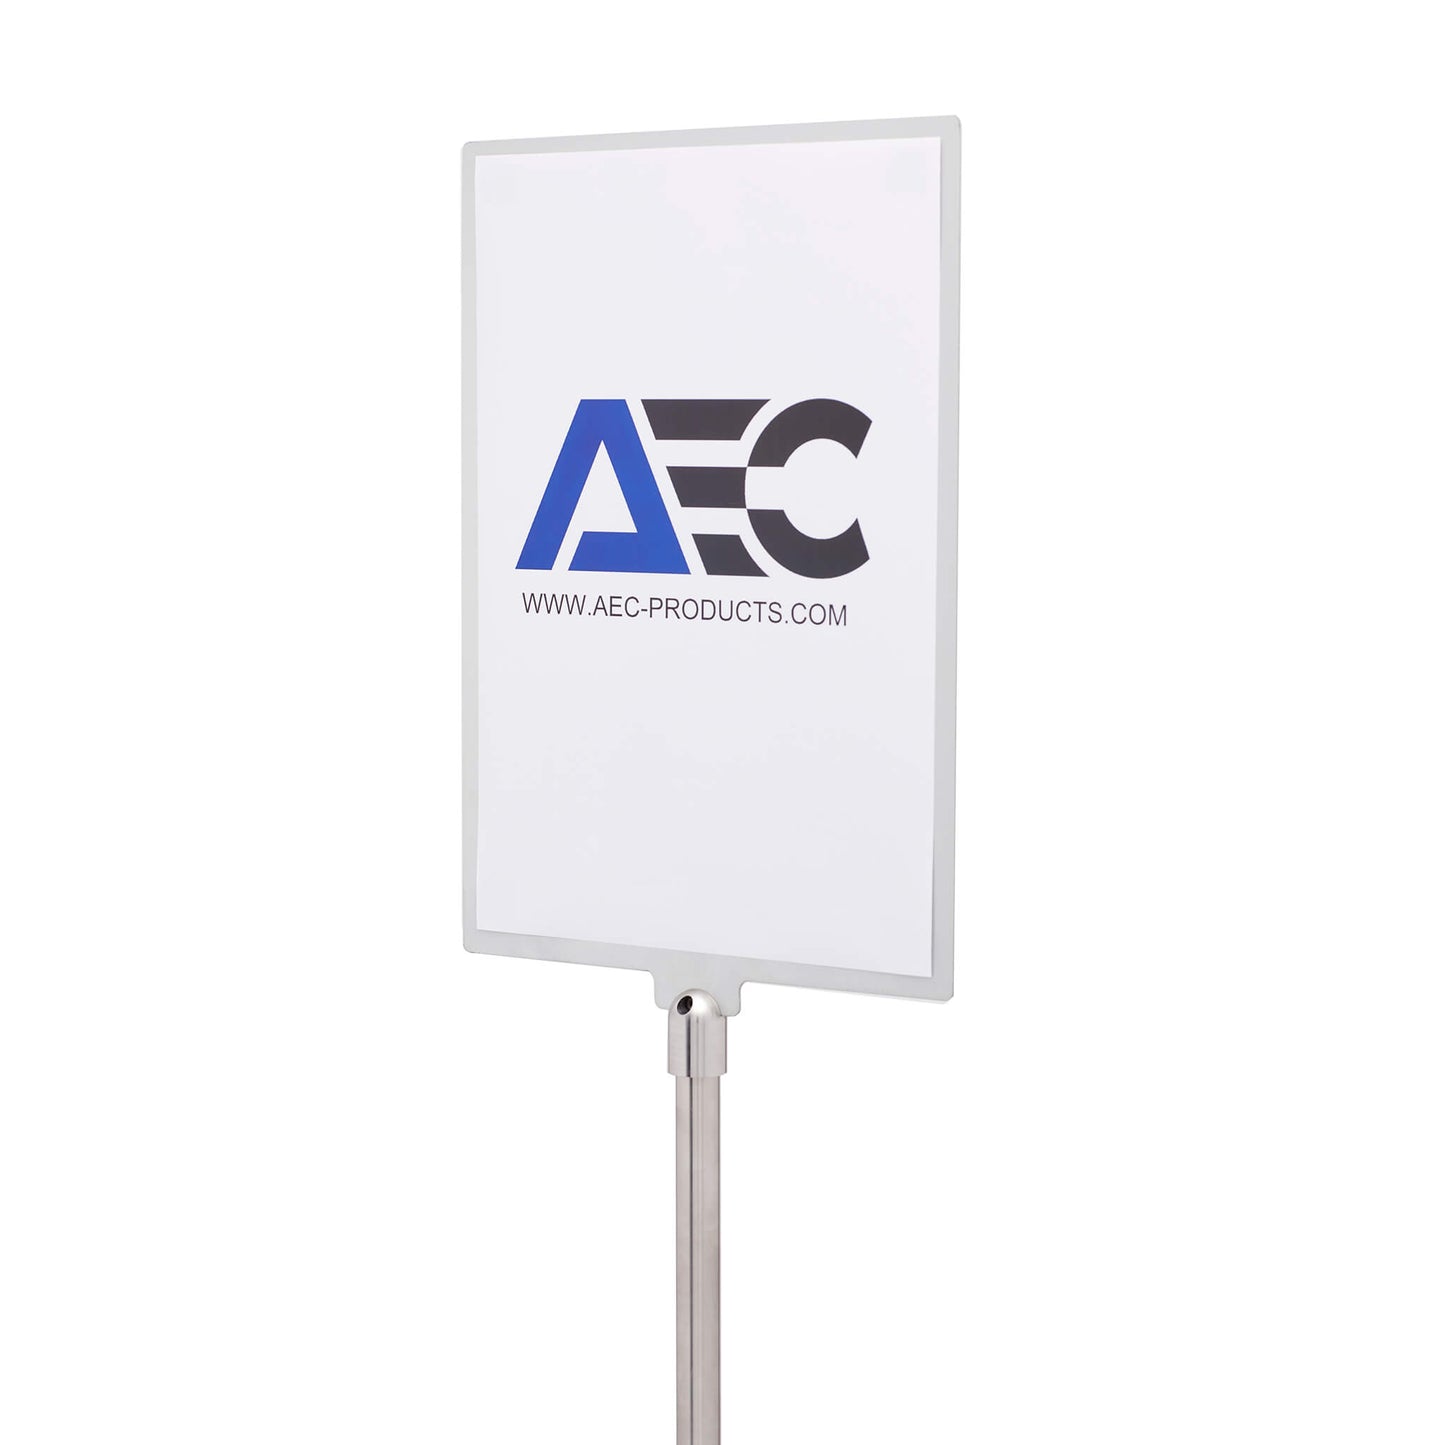 A3 Double-Sided Display Stand